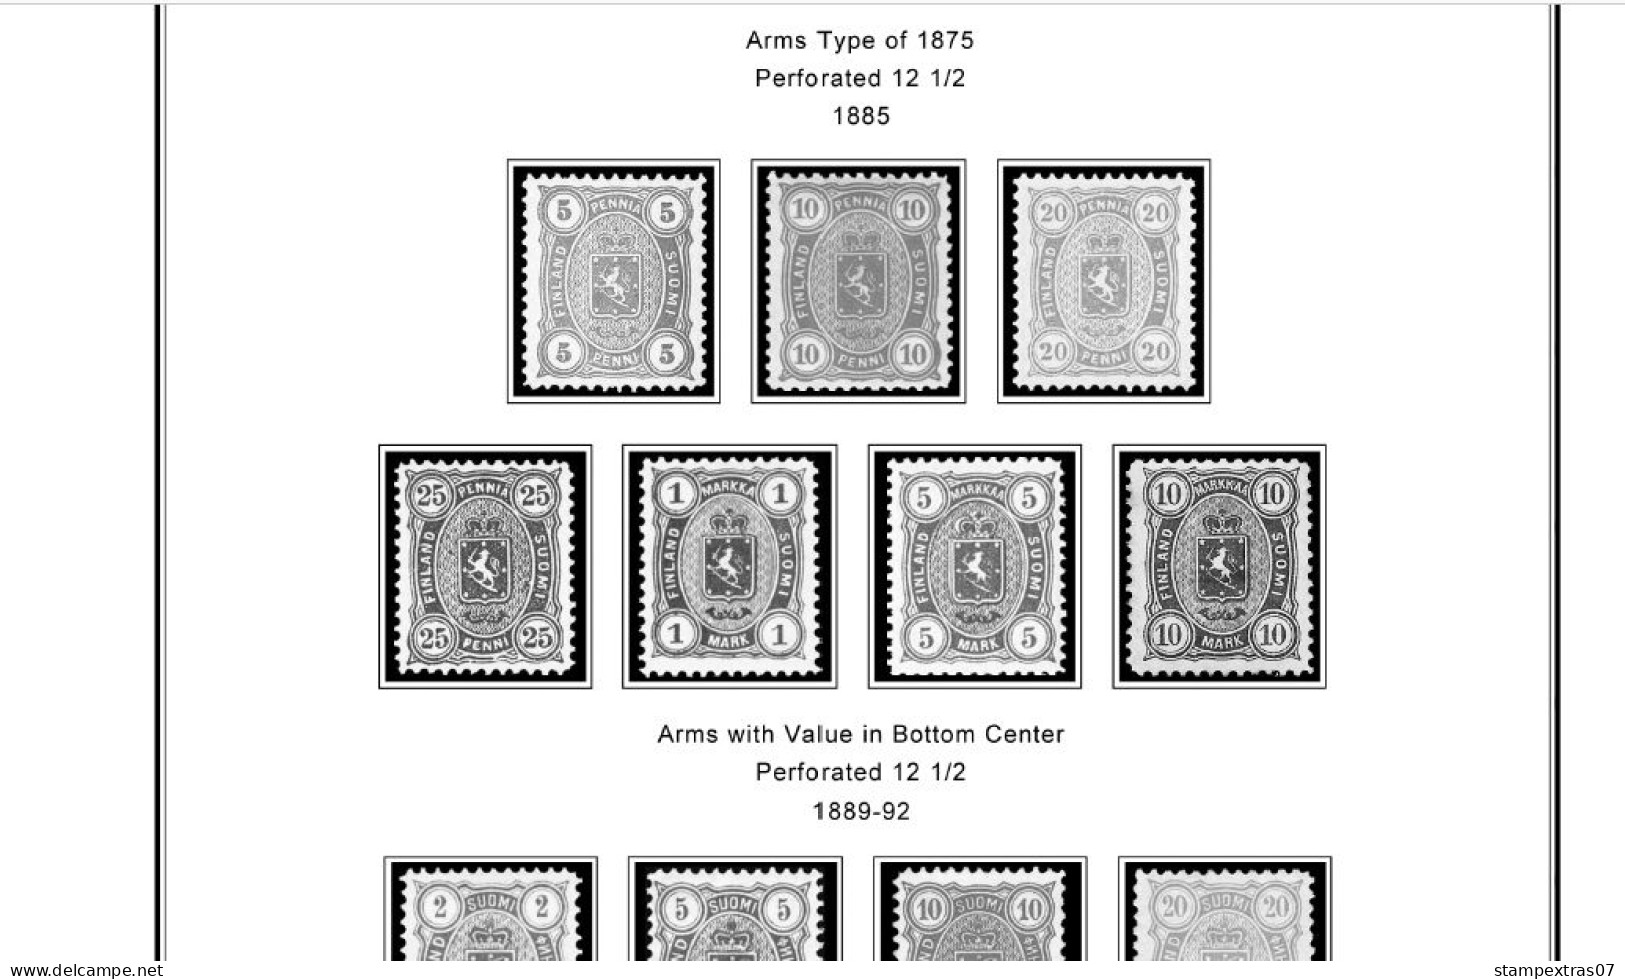 FINLAND 1856-2010 STAMP ALBUM PAGES (218 B&w Illustrated Pages) - Anglais